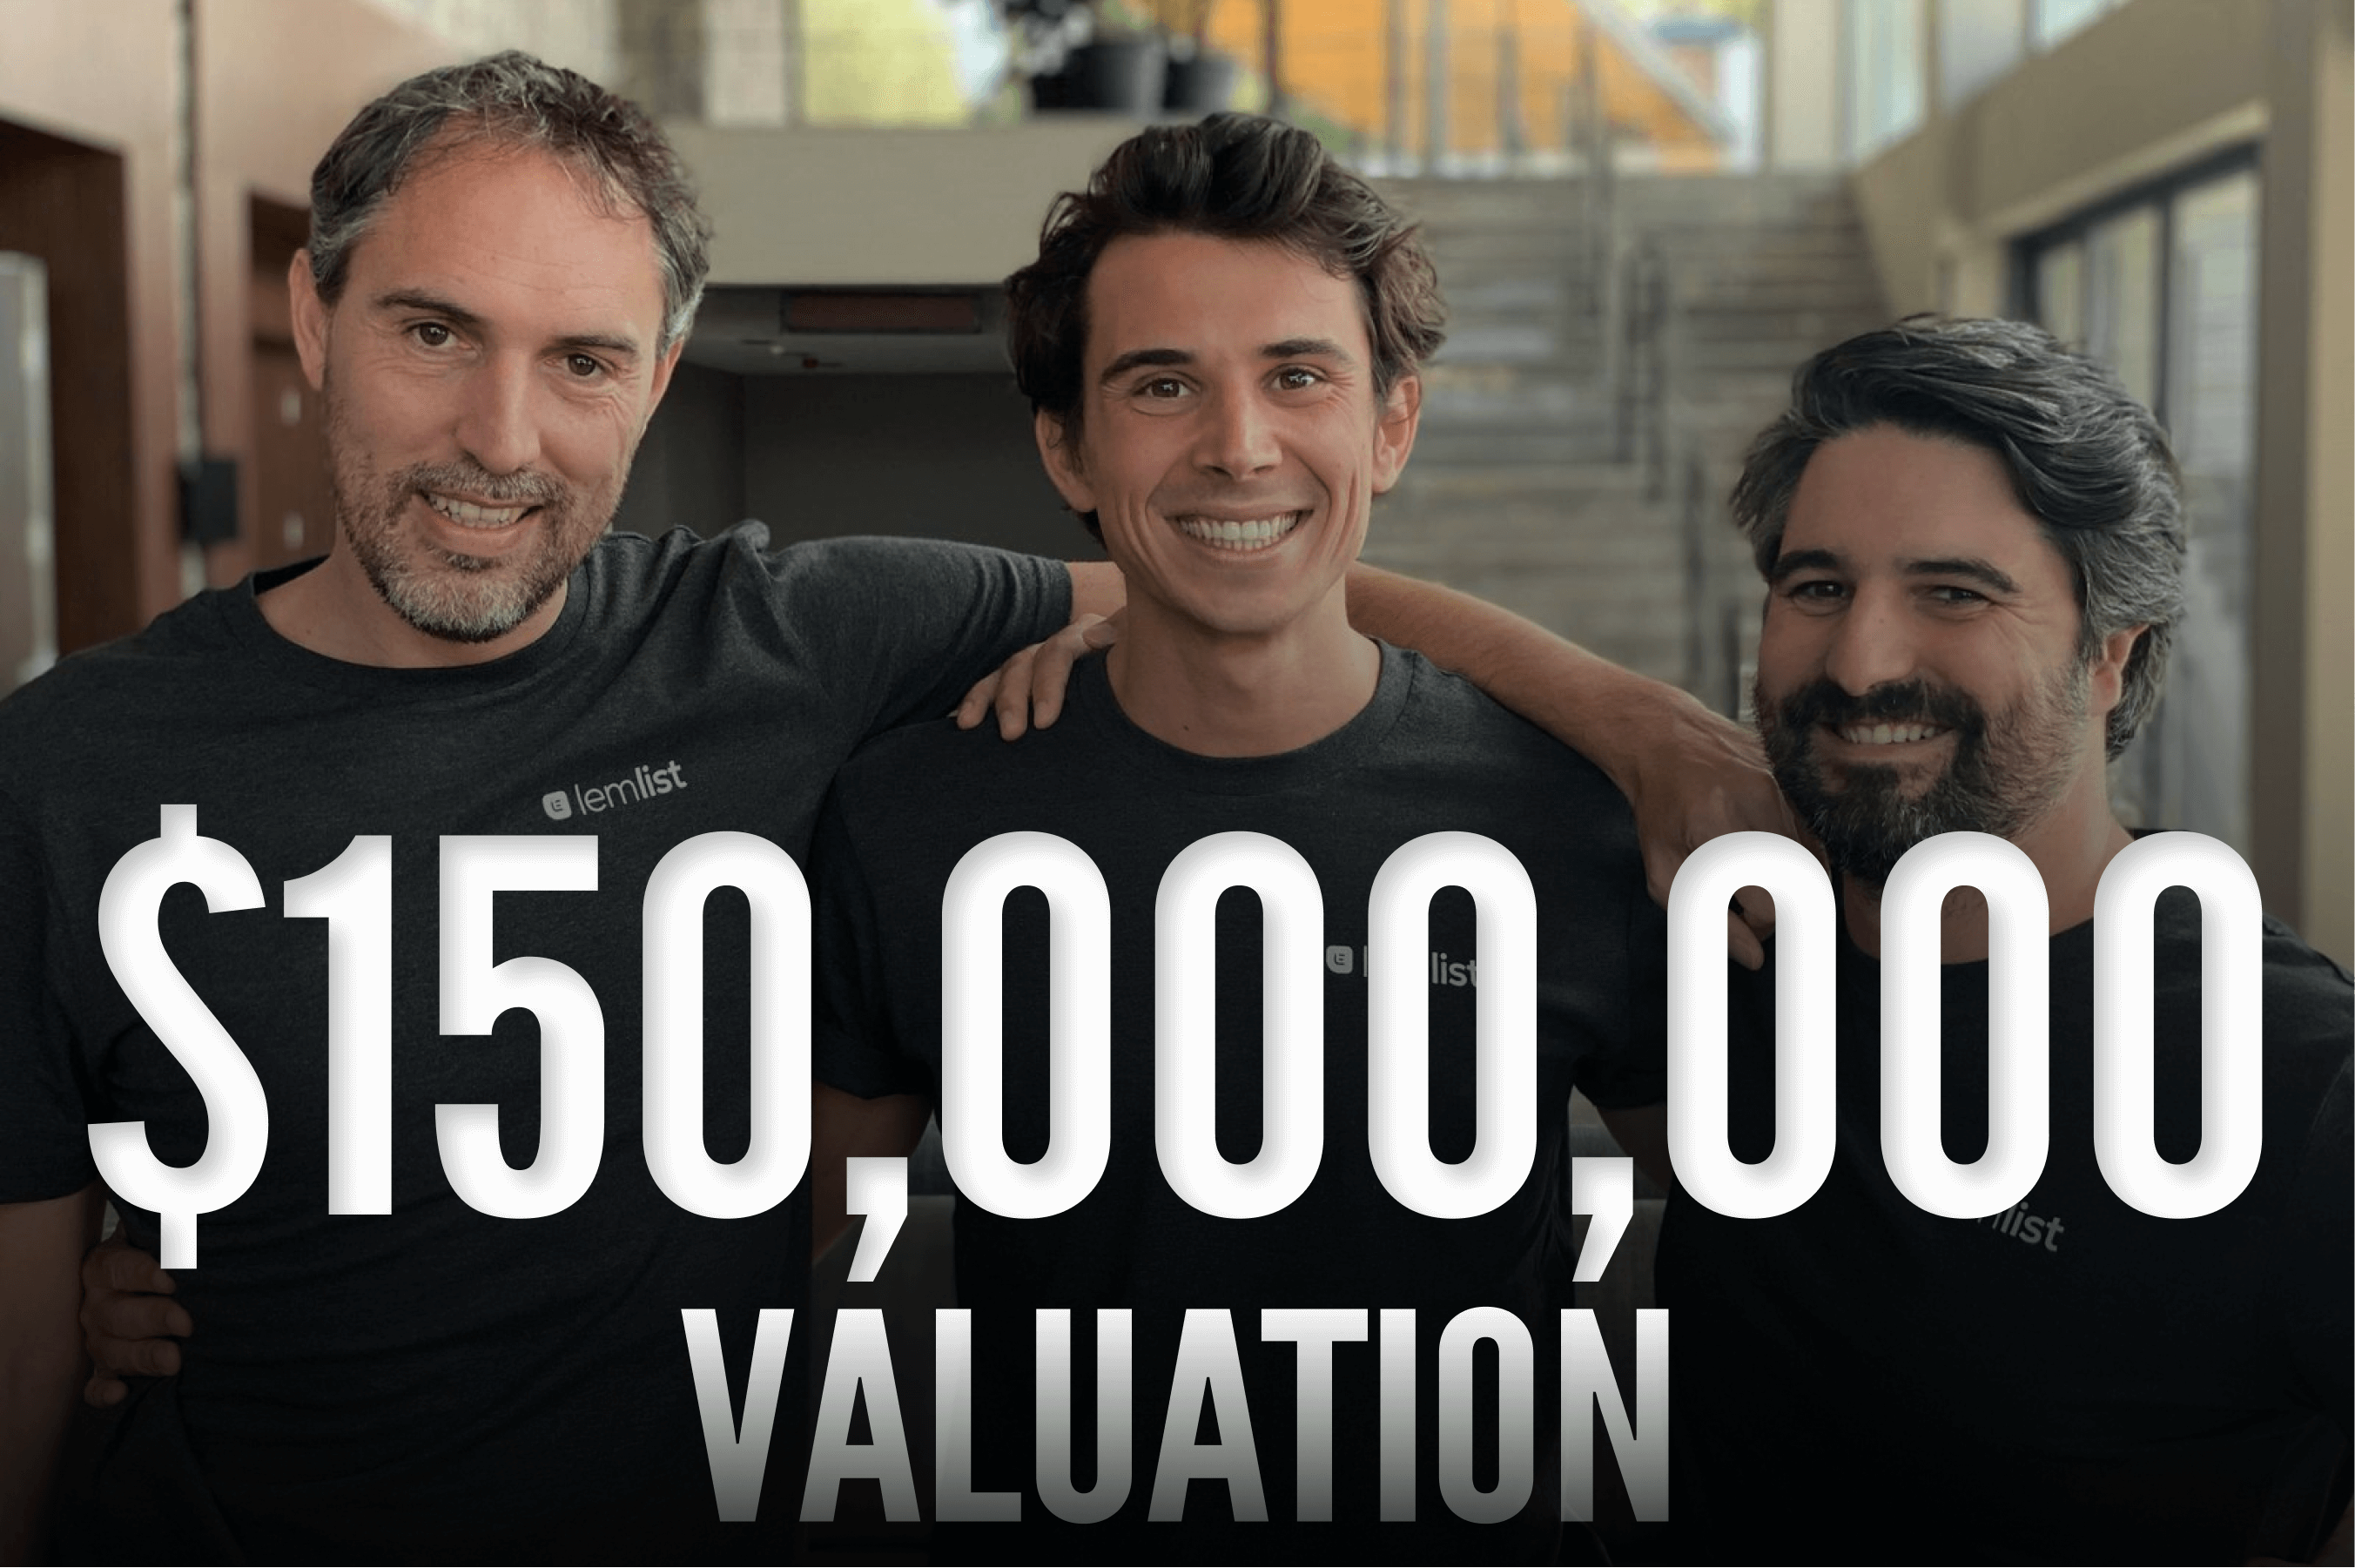 From $0 to $150M valuation in 3.5 years